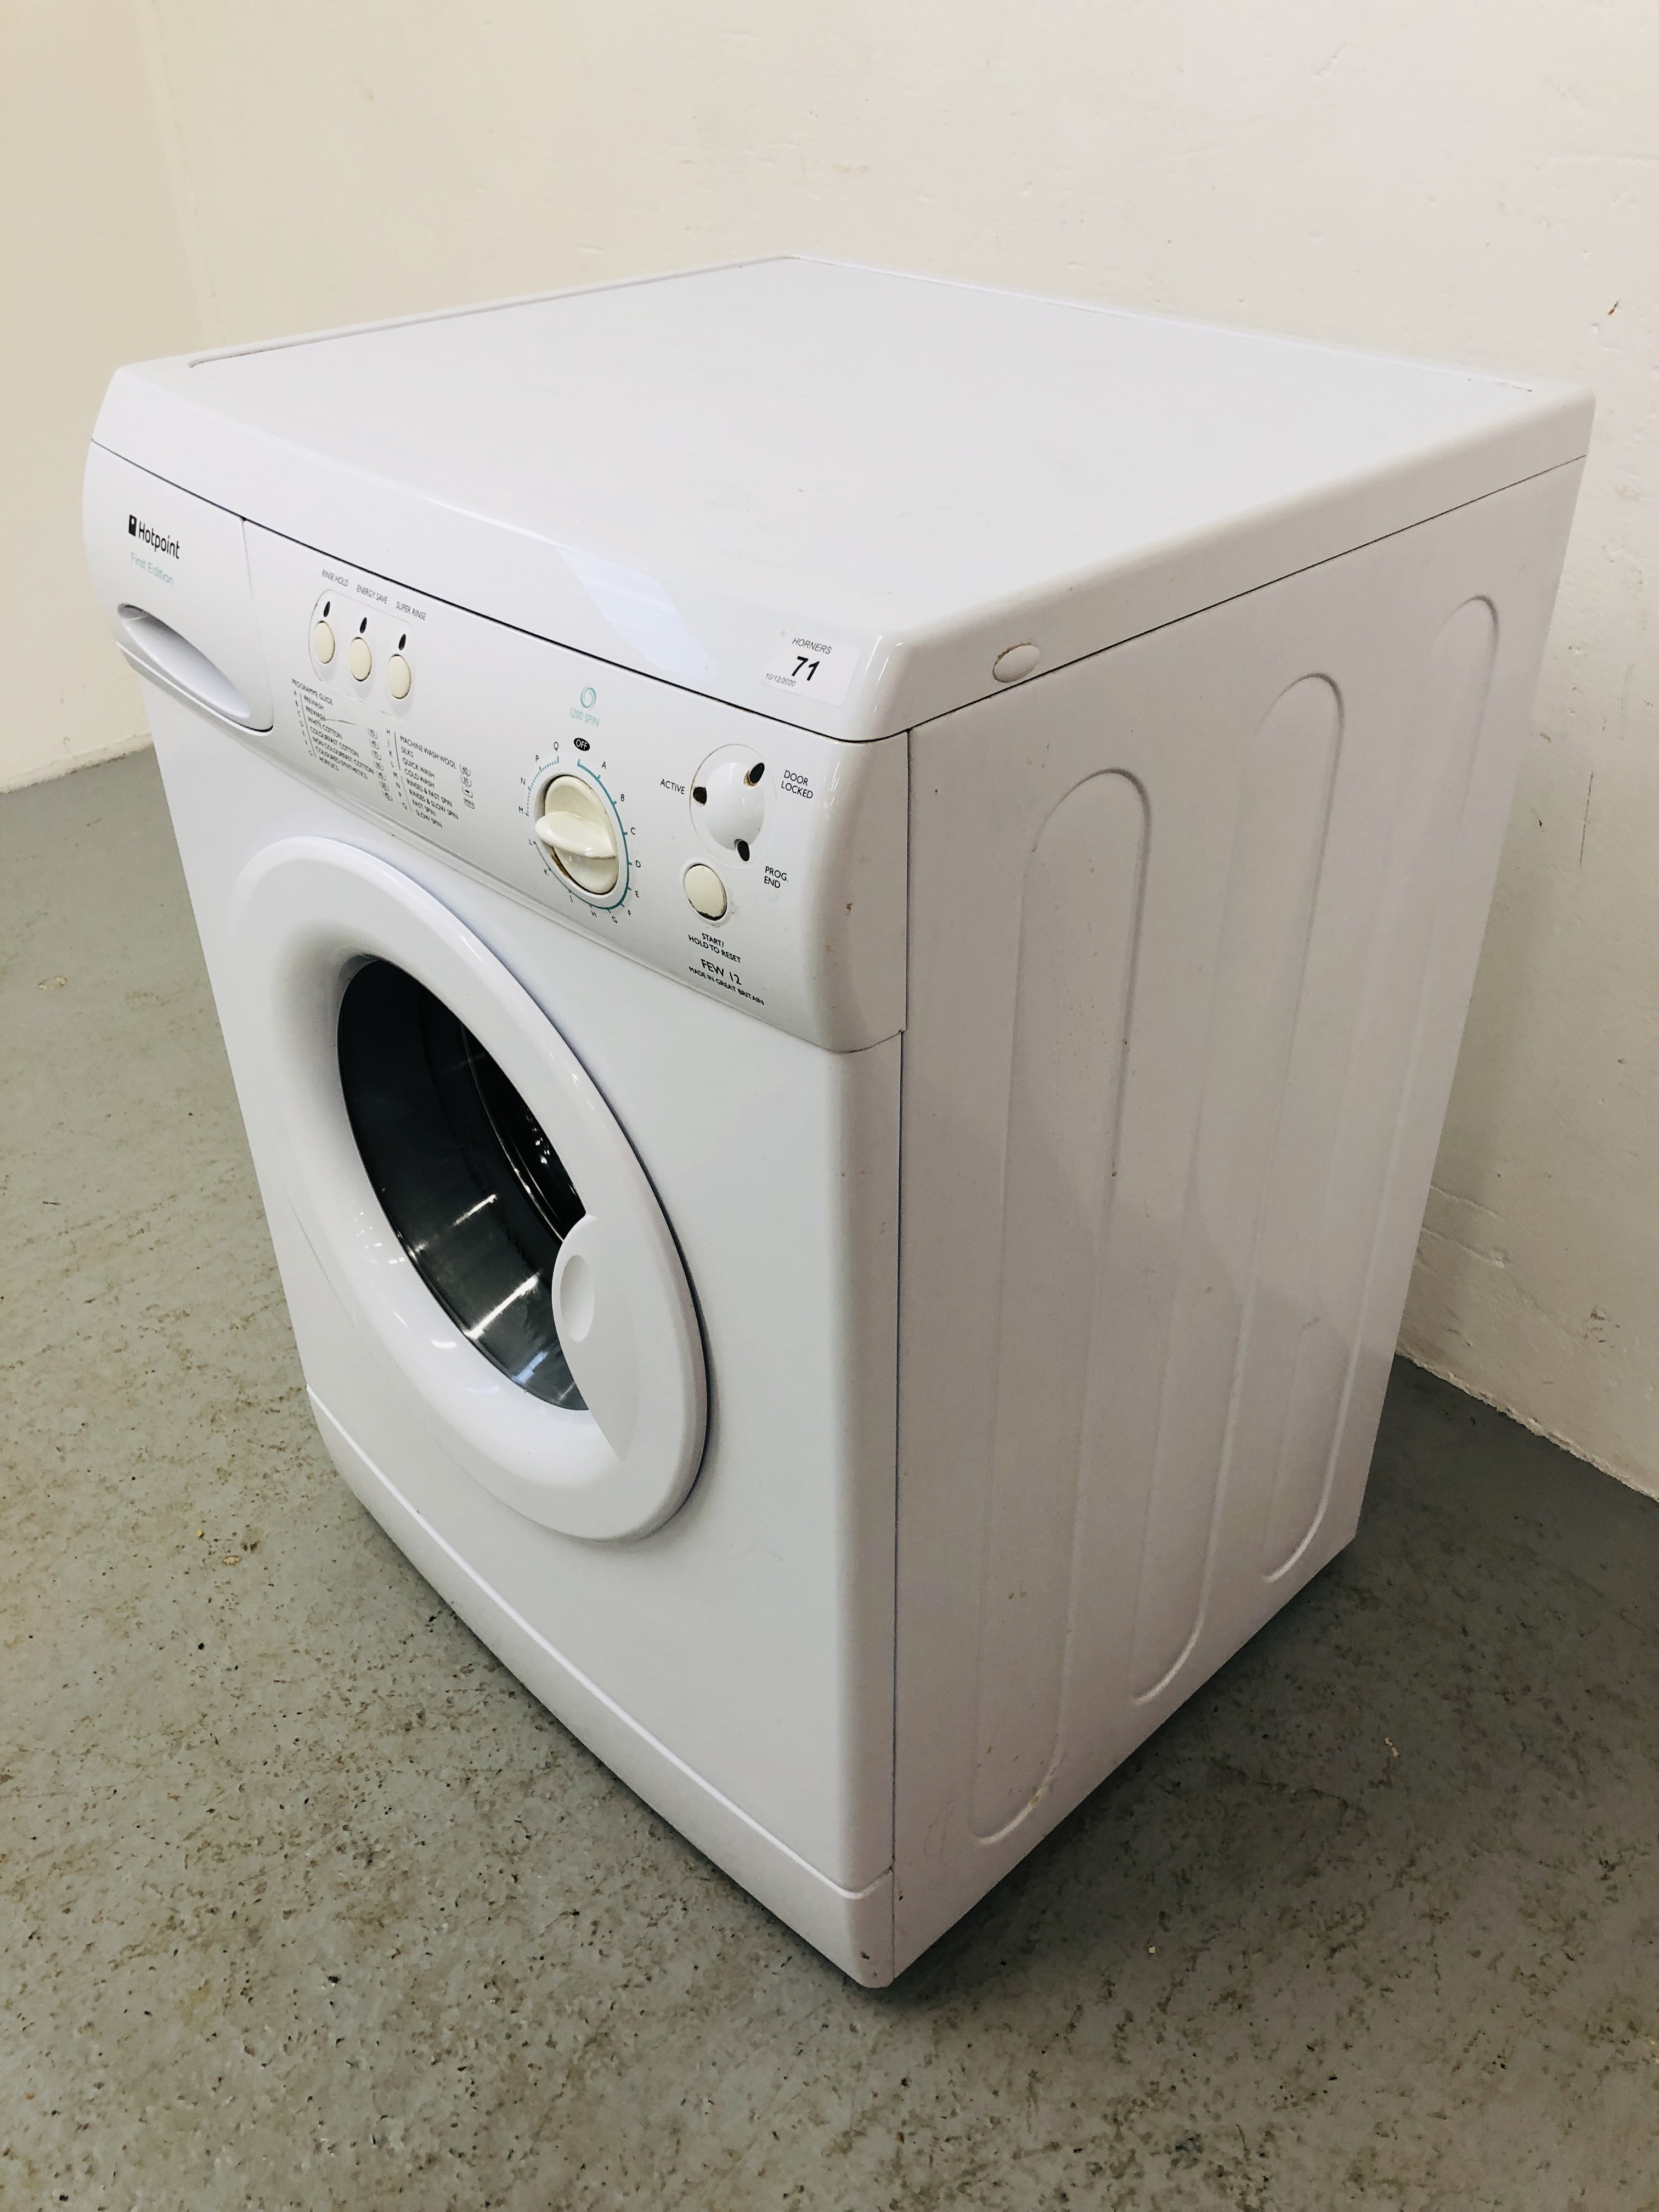 HOTPOINT FIRST EDITION 1200 SPIN WASHING MACHINE - SOLD AS SEEN - Image 5 of 5